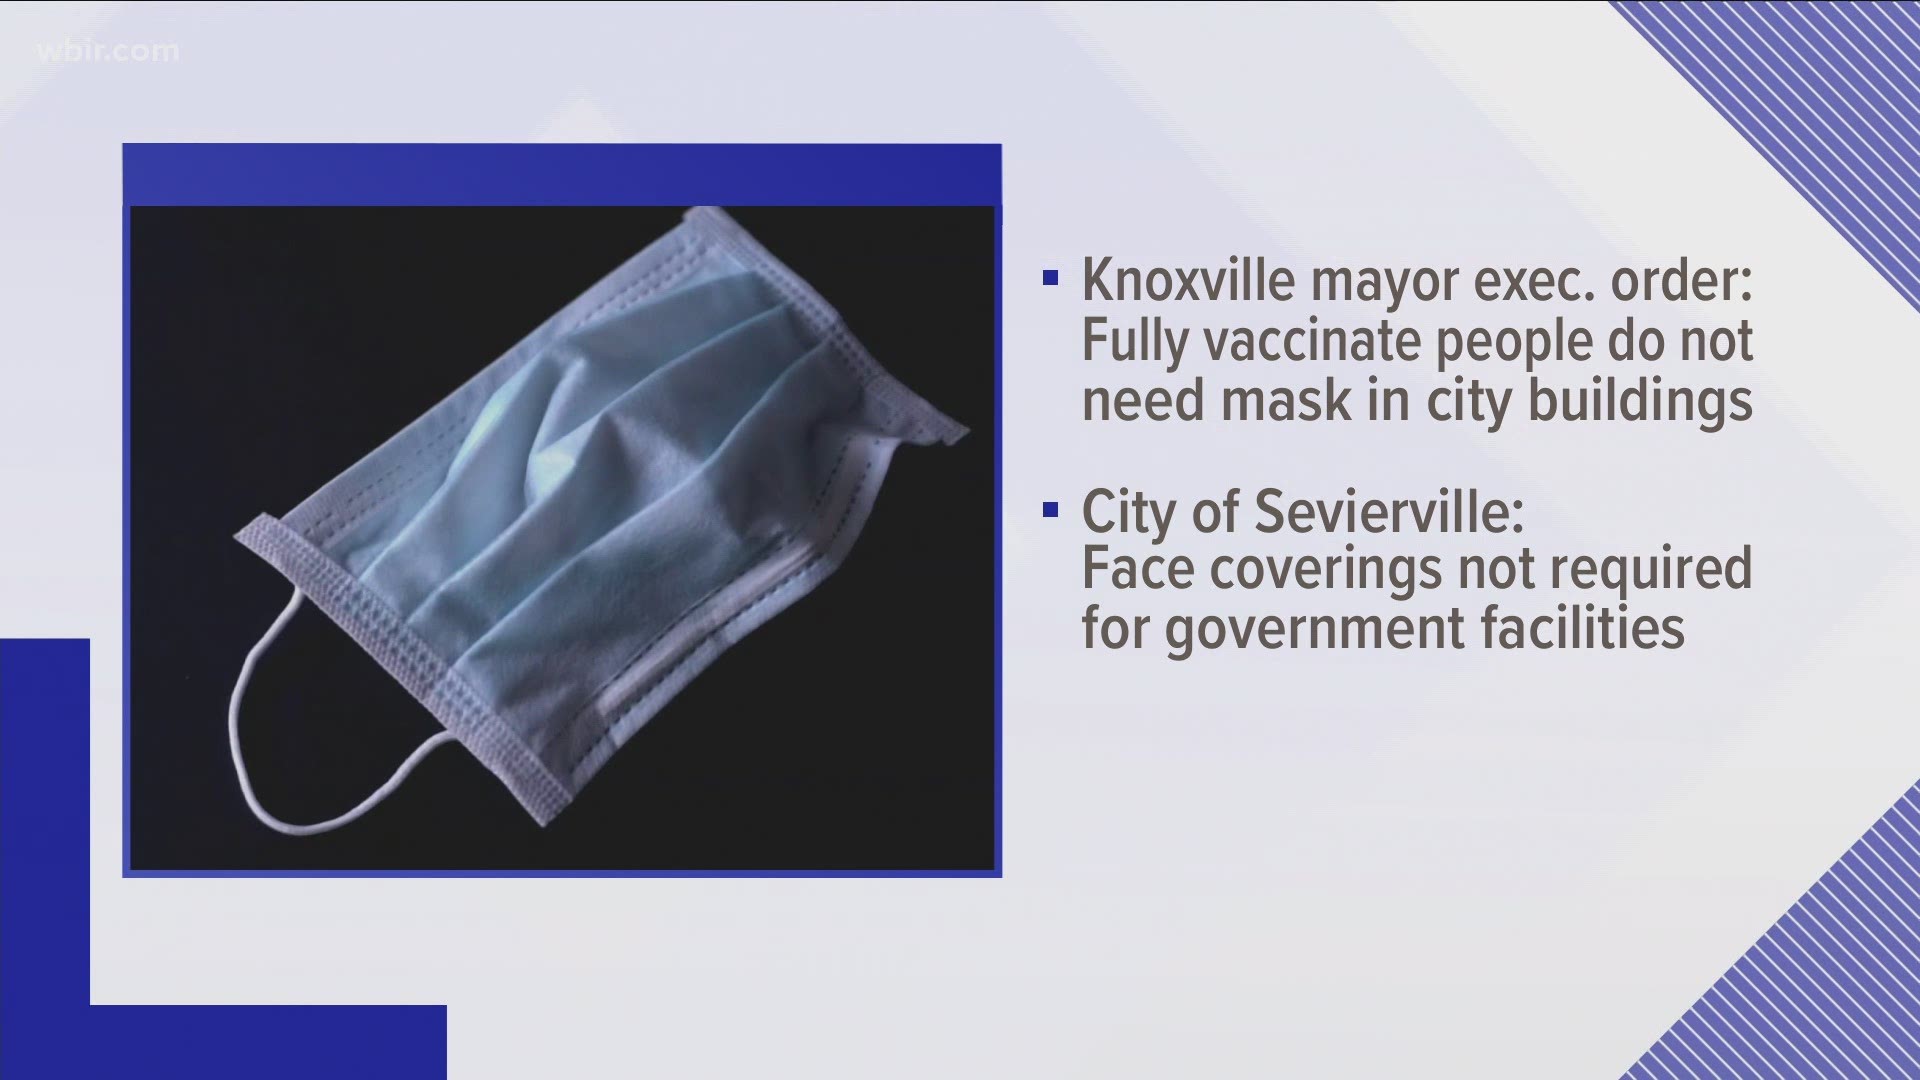 Both Knoxville and Sevierville updated their mask policies on Tuesday, reducing restrictions on when people should wear masks.